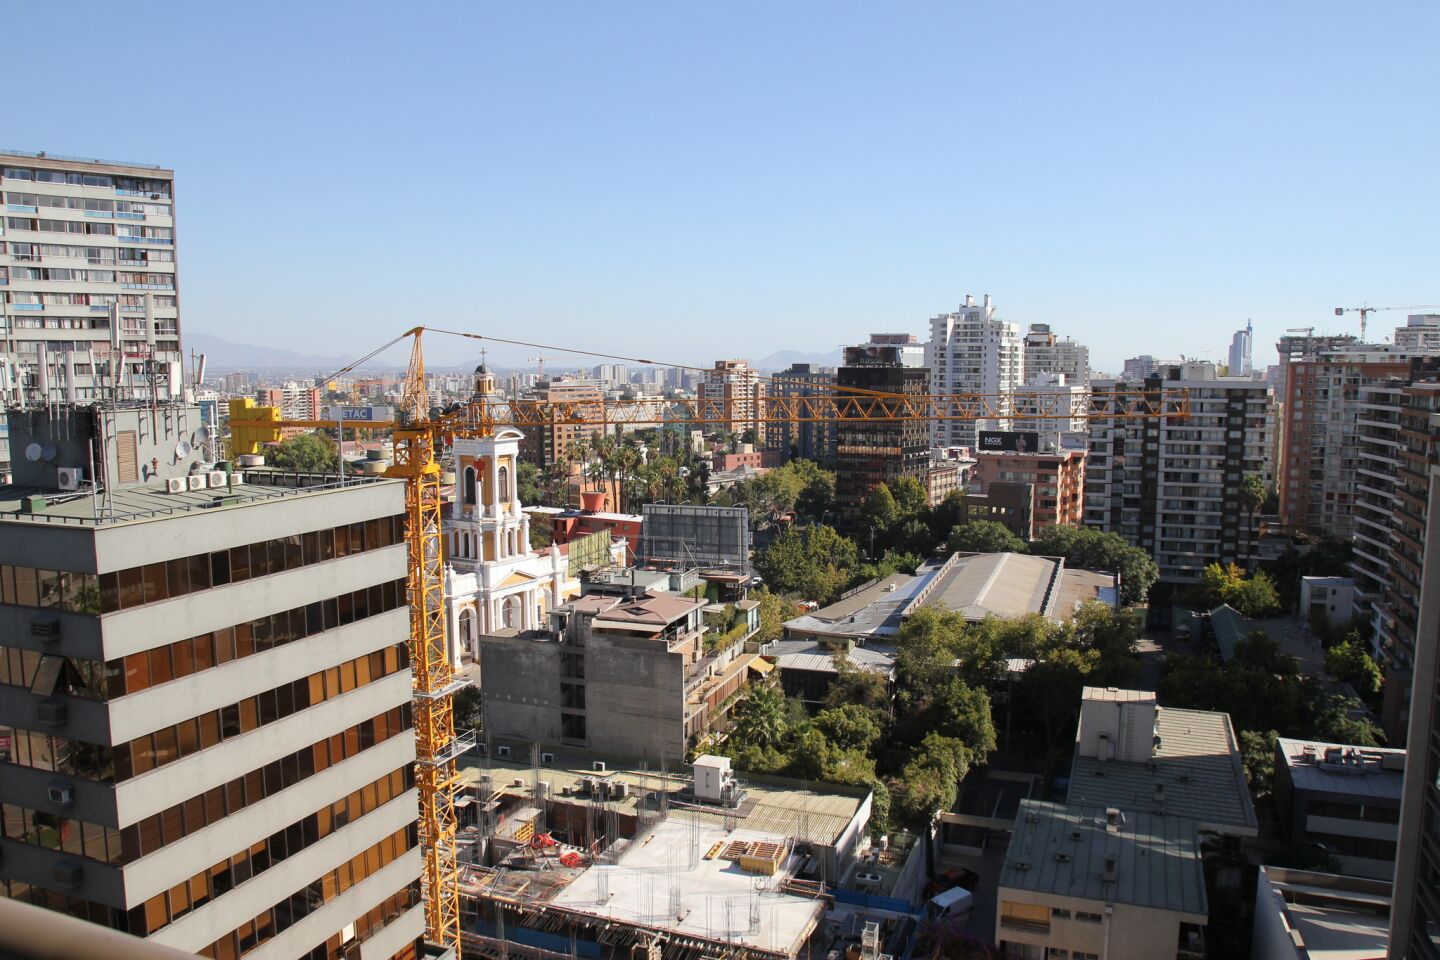 The Chilean capital's skyline is riddled with cranes. For architect, the country is a great place to build.